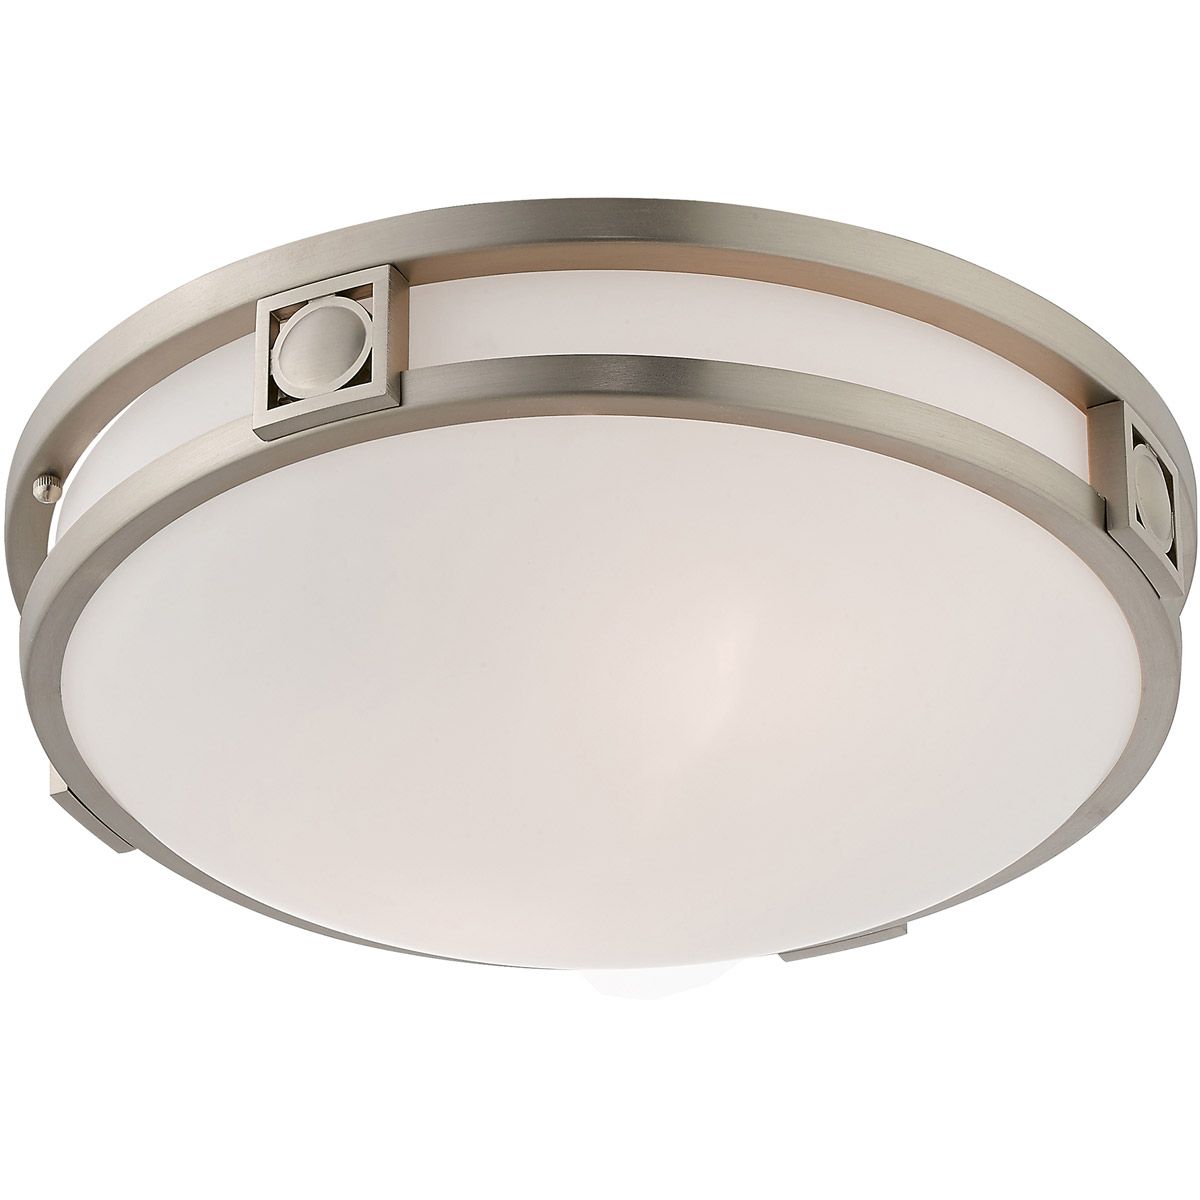 Favorite Ceiling Hung Polished Nickel Oval Mirrors Intended For Livex 4487 91 Matrix 2 Light 13 Inch Brushed Nickel Ceiling Mount (View 11 of 15)